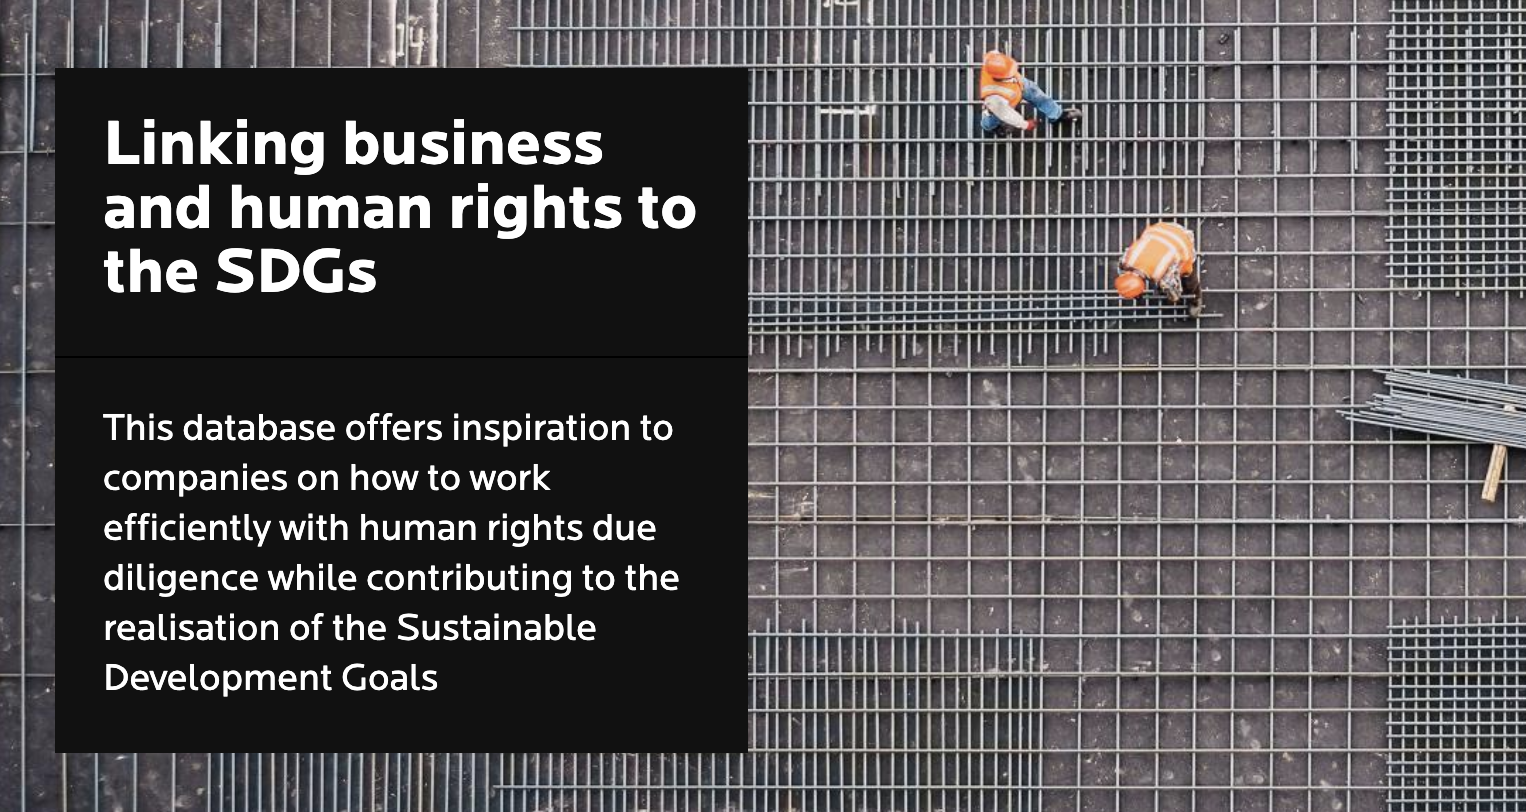 Linking business and human rights to the SDGs